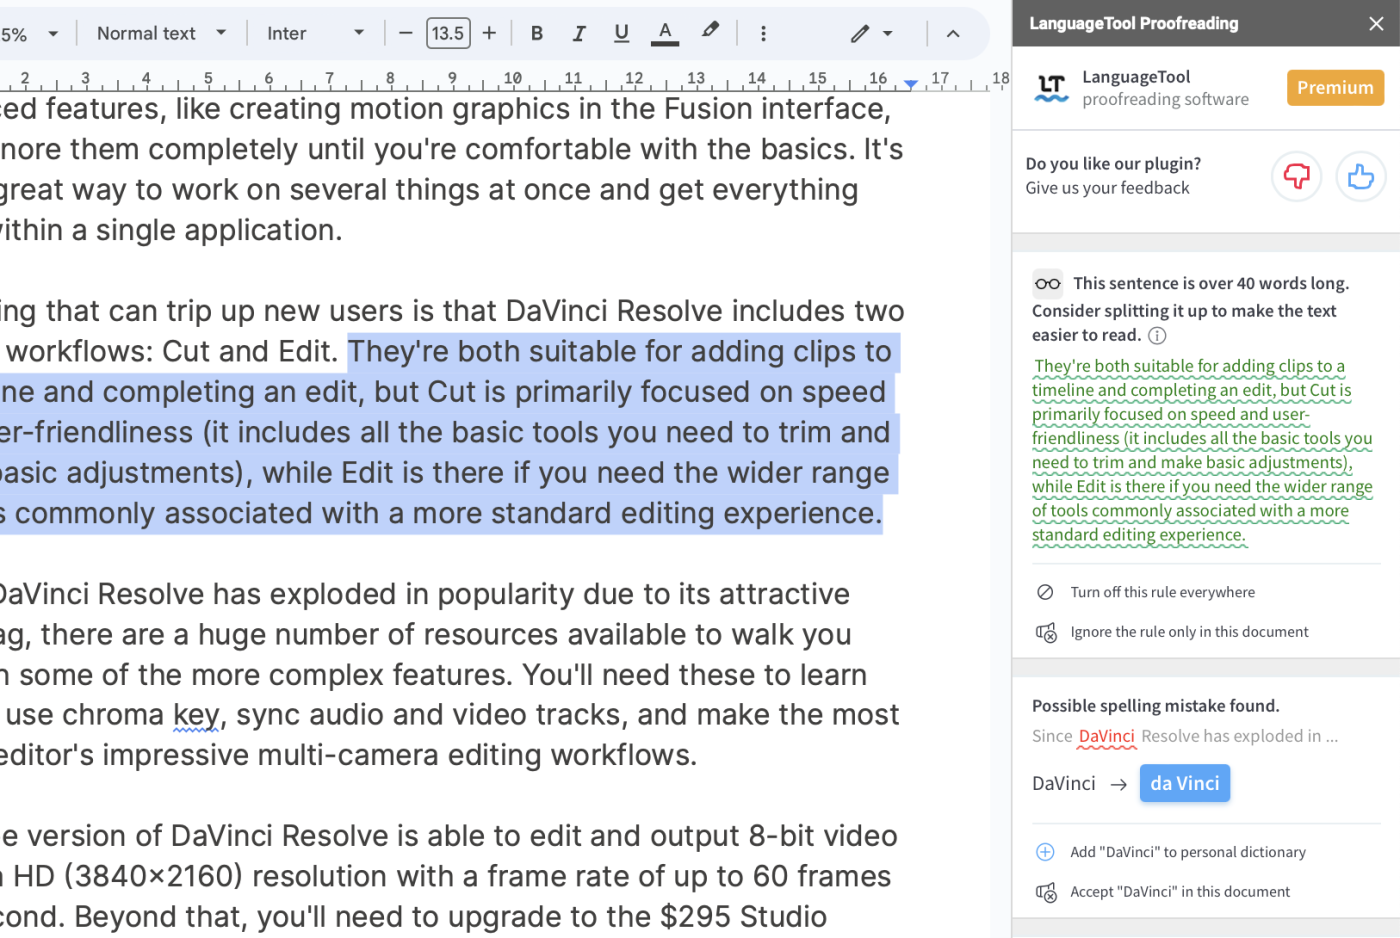 Demo of how to find synonyms for text in a doc using the OneLook Thesaurus Google Docs add-on.